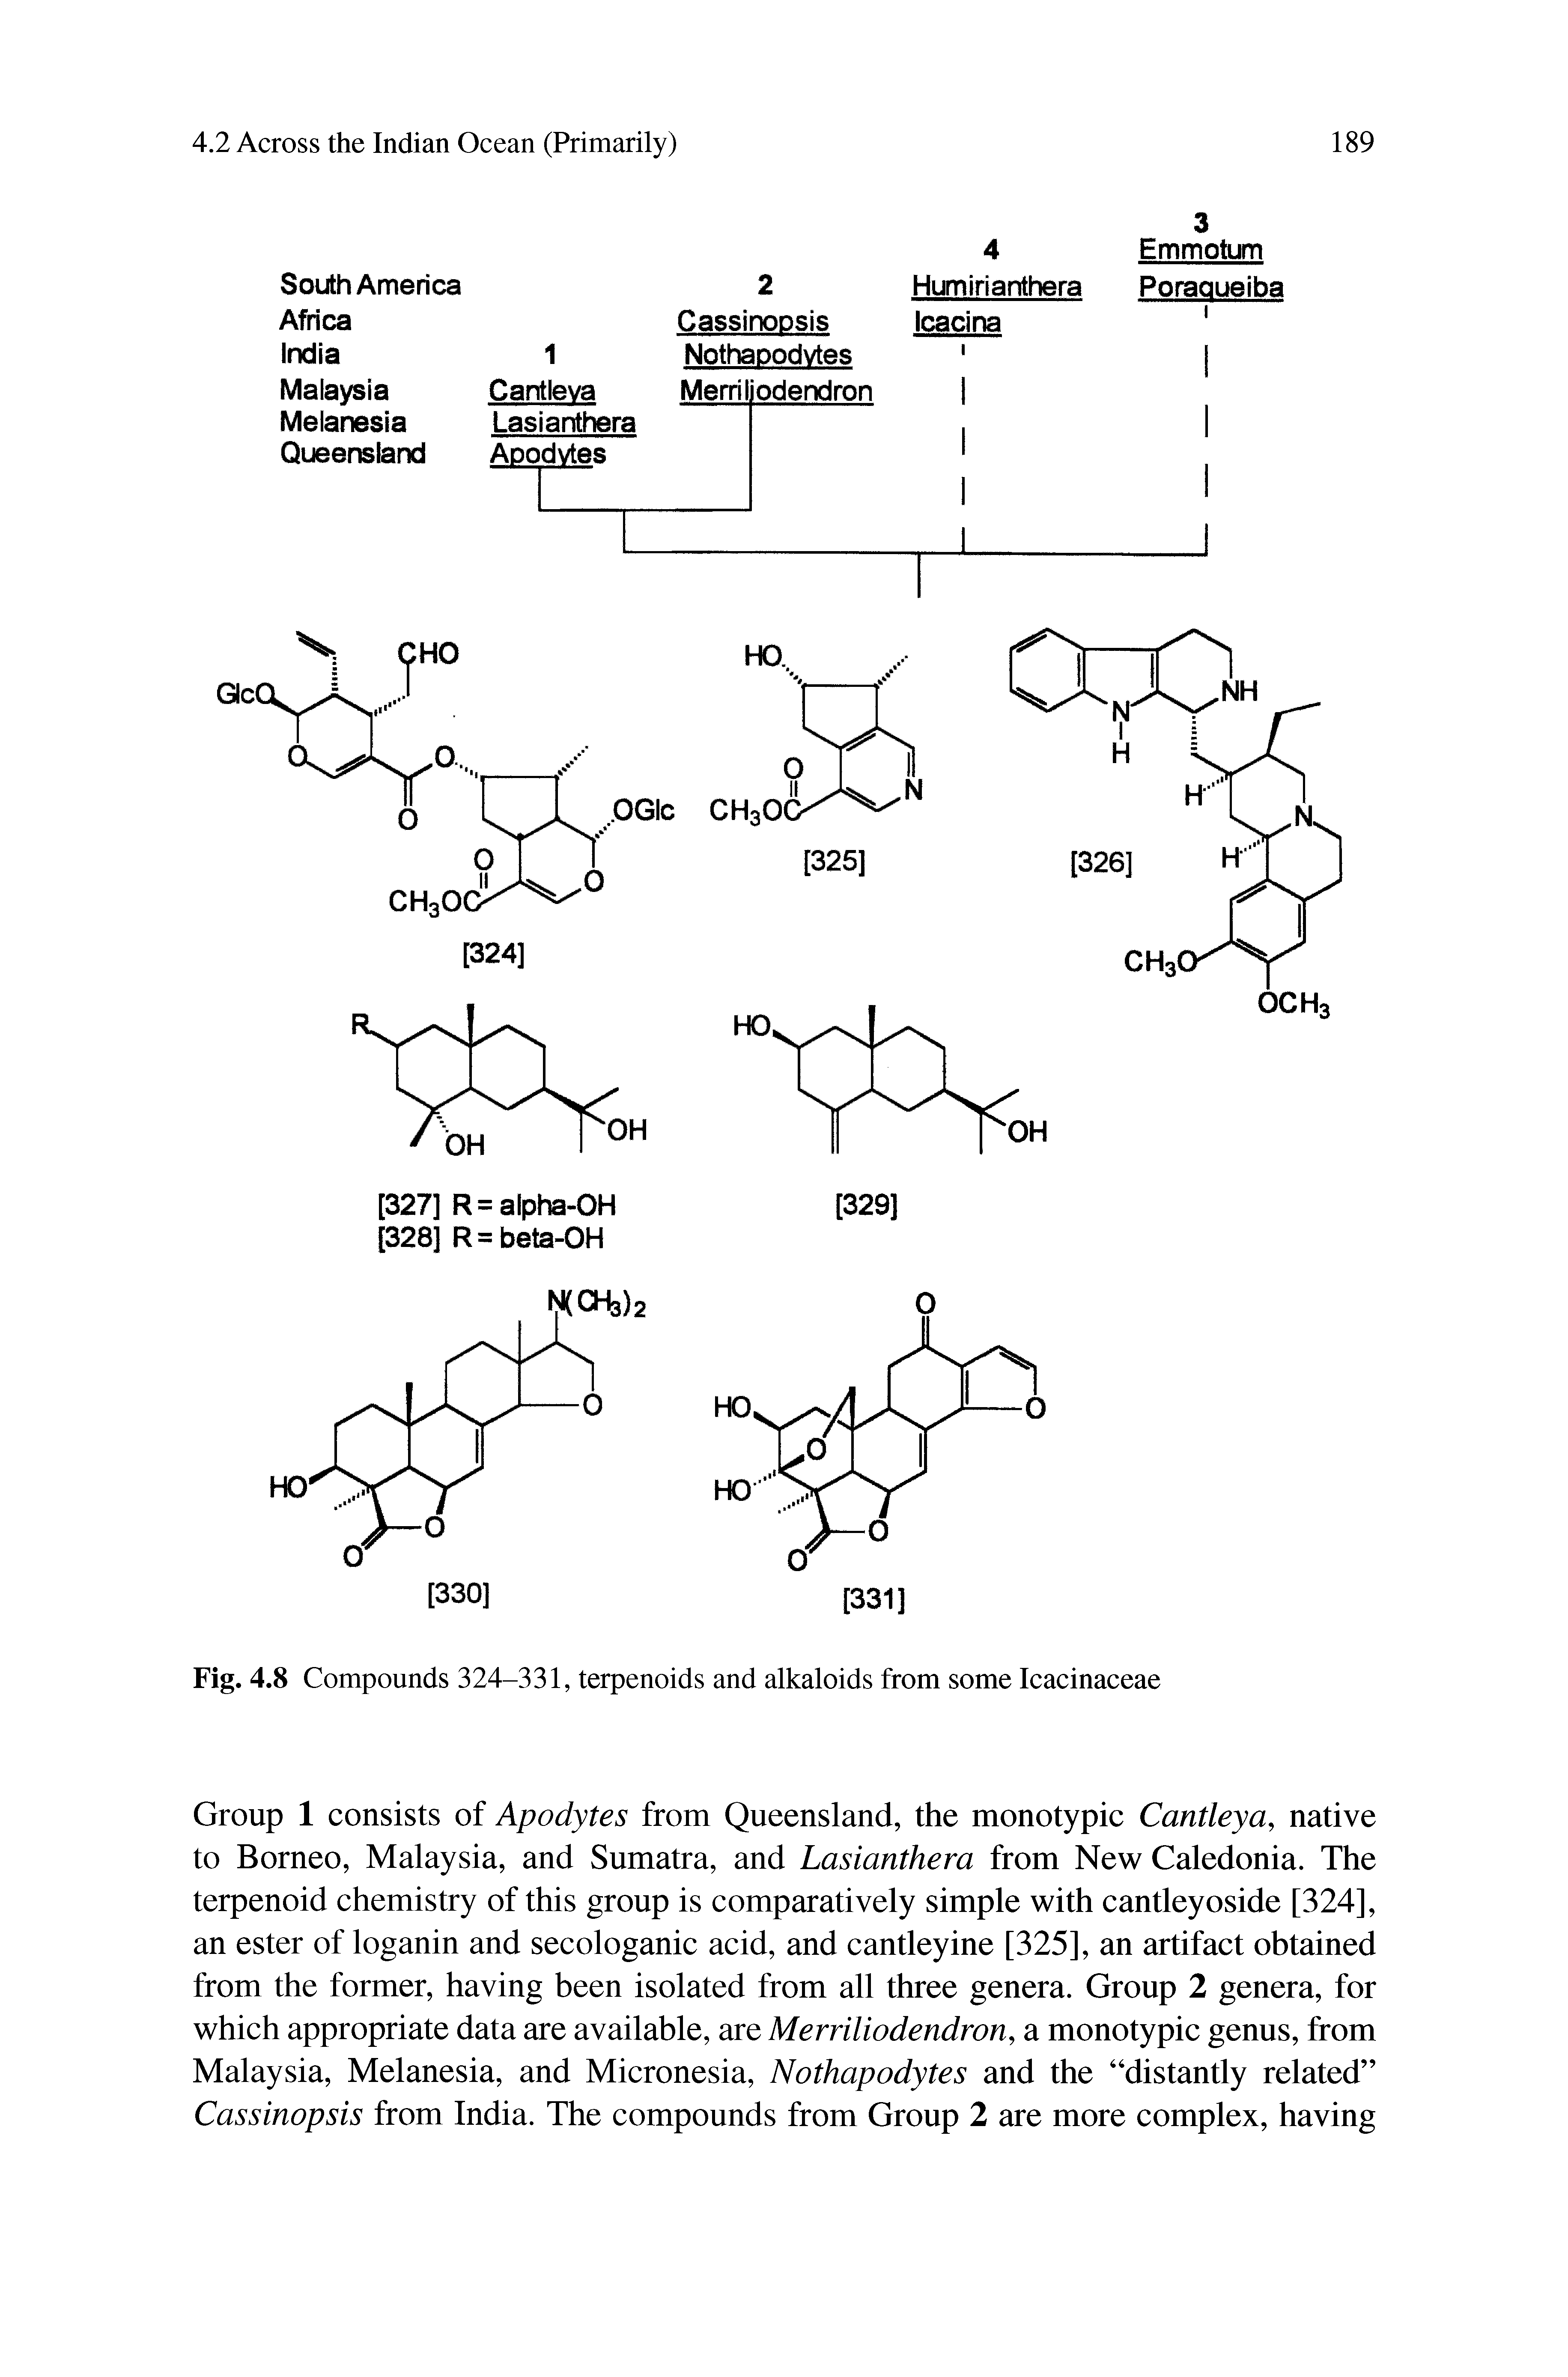 Fig. 4.8 Compounds 324-331, terpenoids and alkaloids from some Icacinaceae...